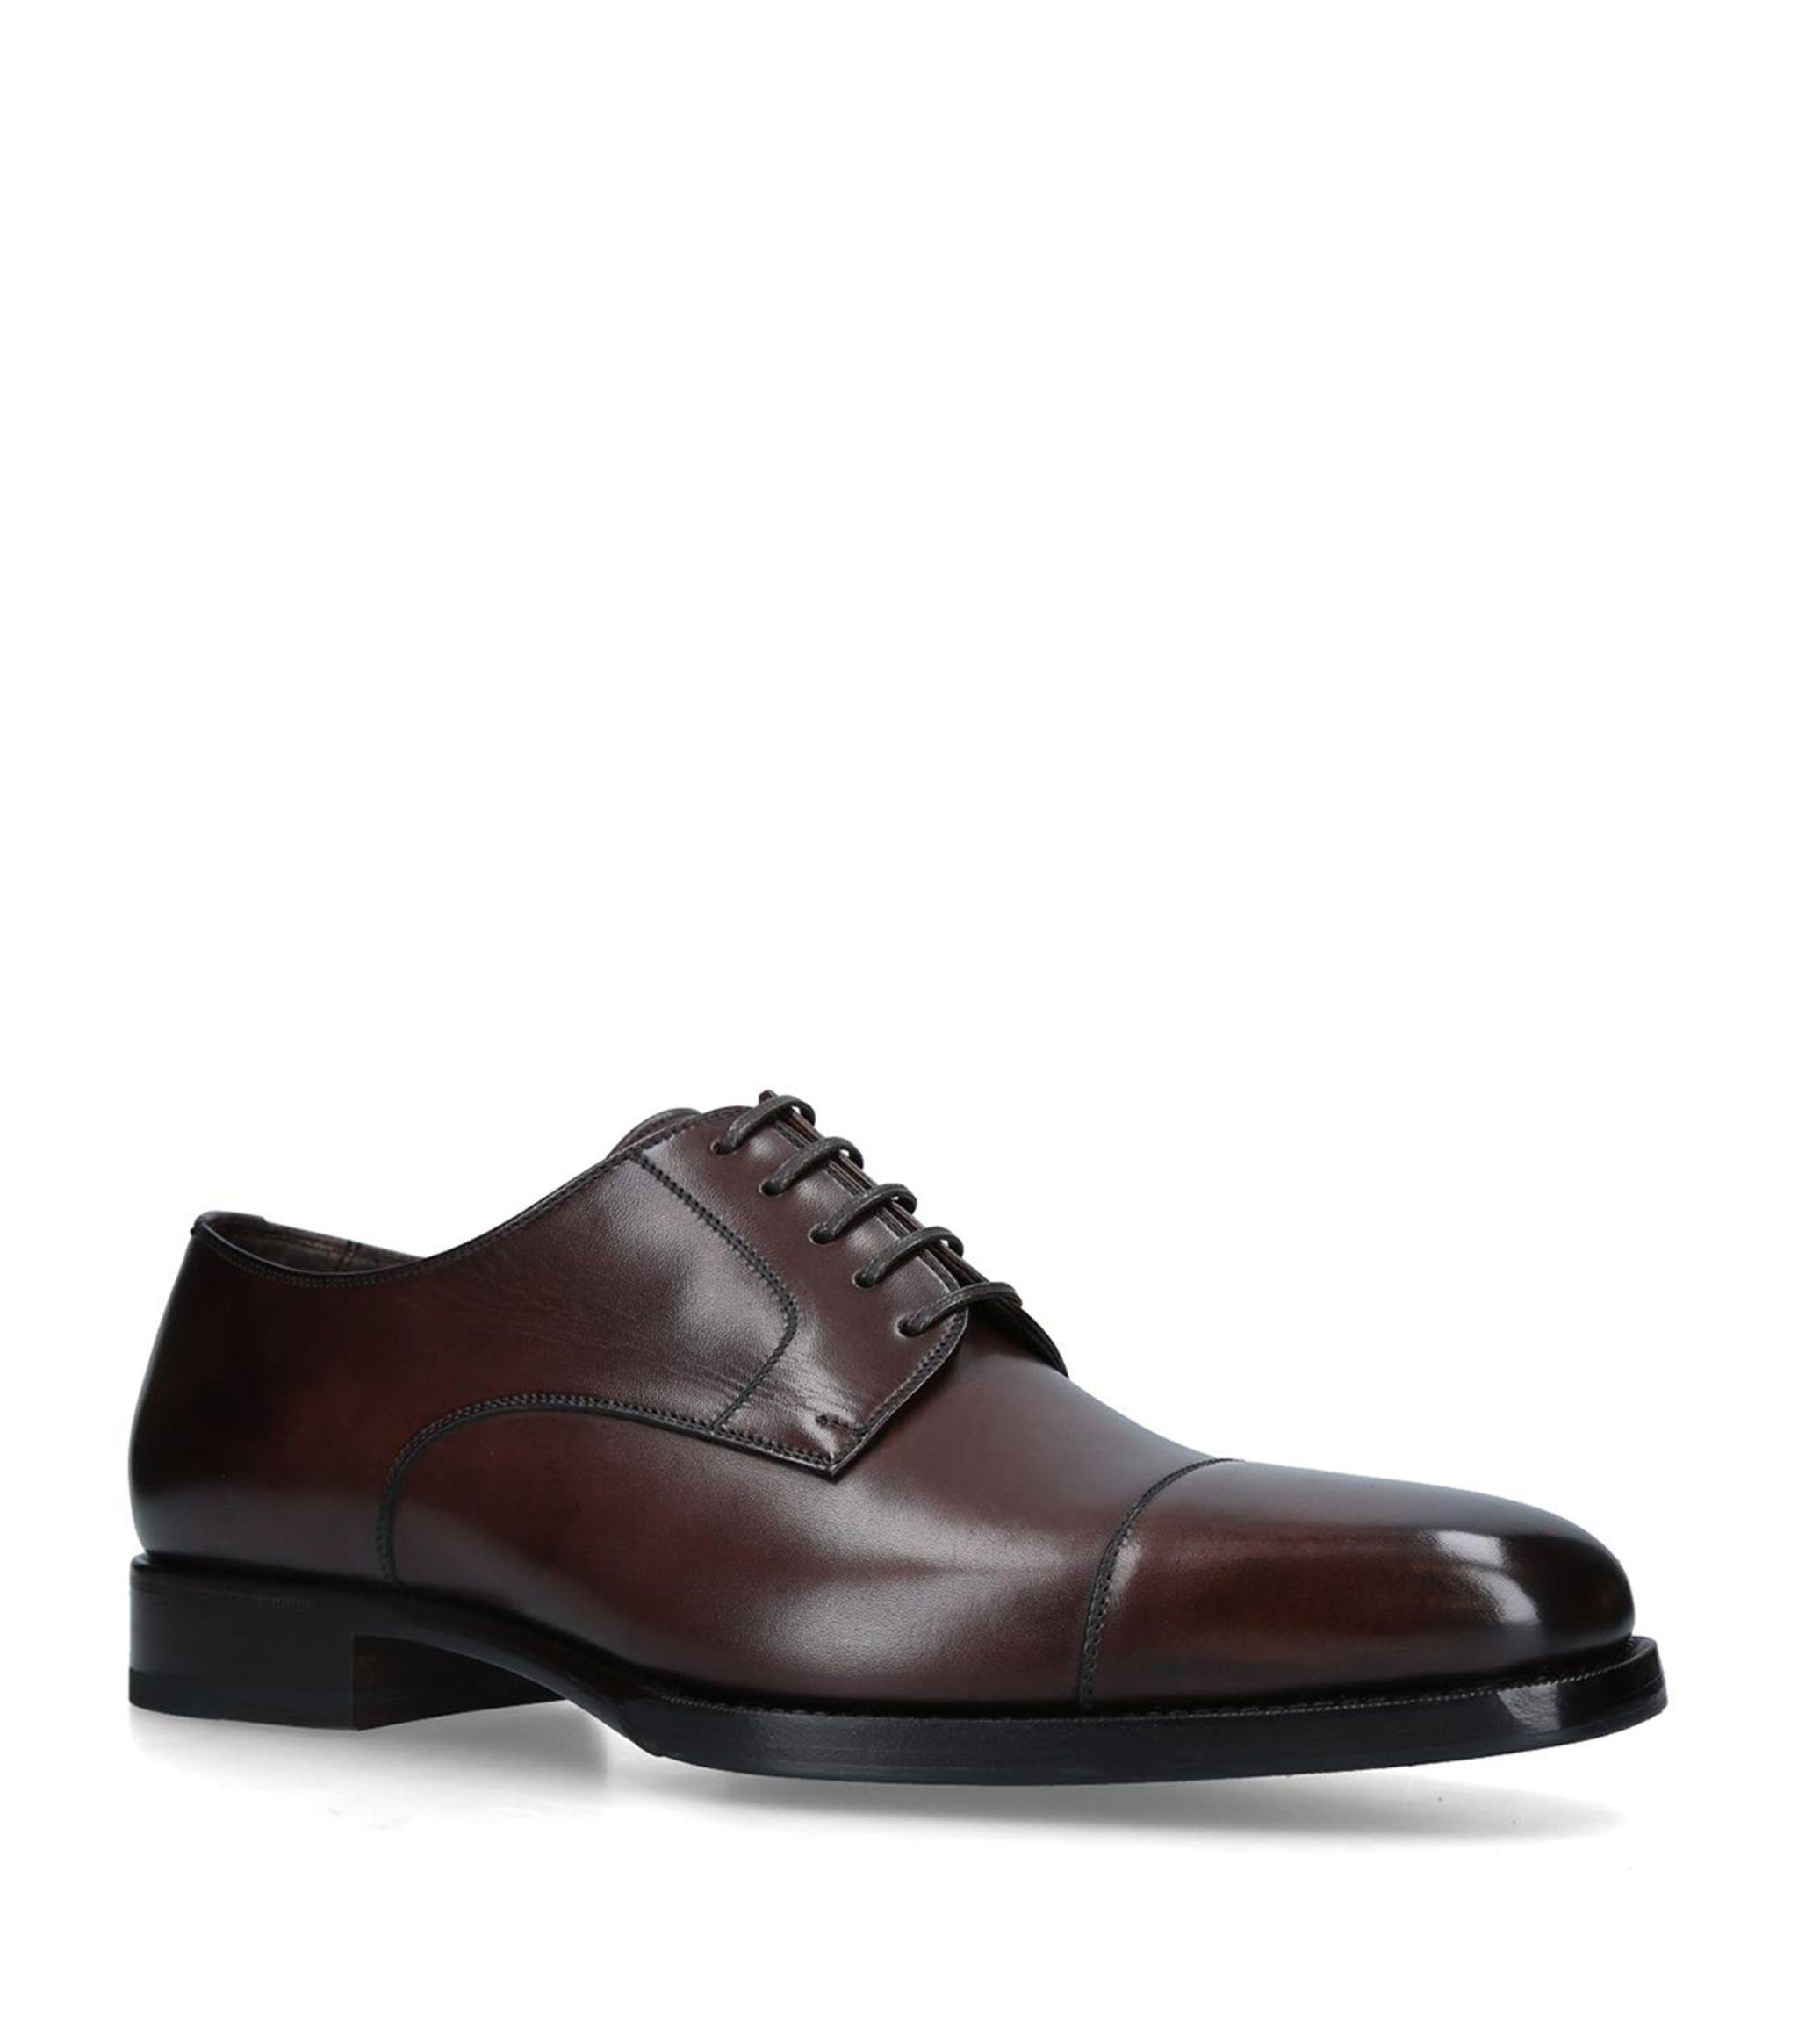 Tom Ford Leather Wessex Derby Shoes in Brown for Men - Lyst